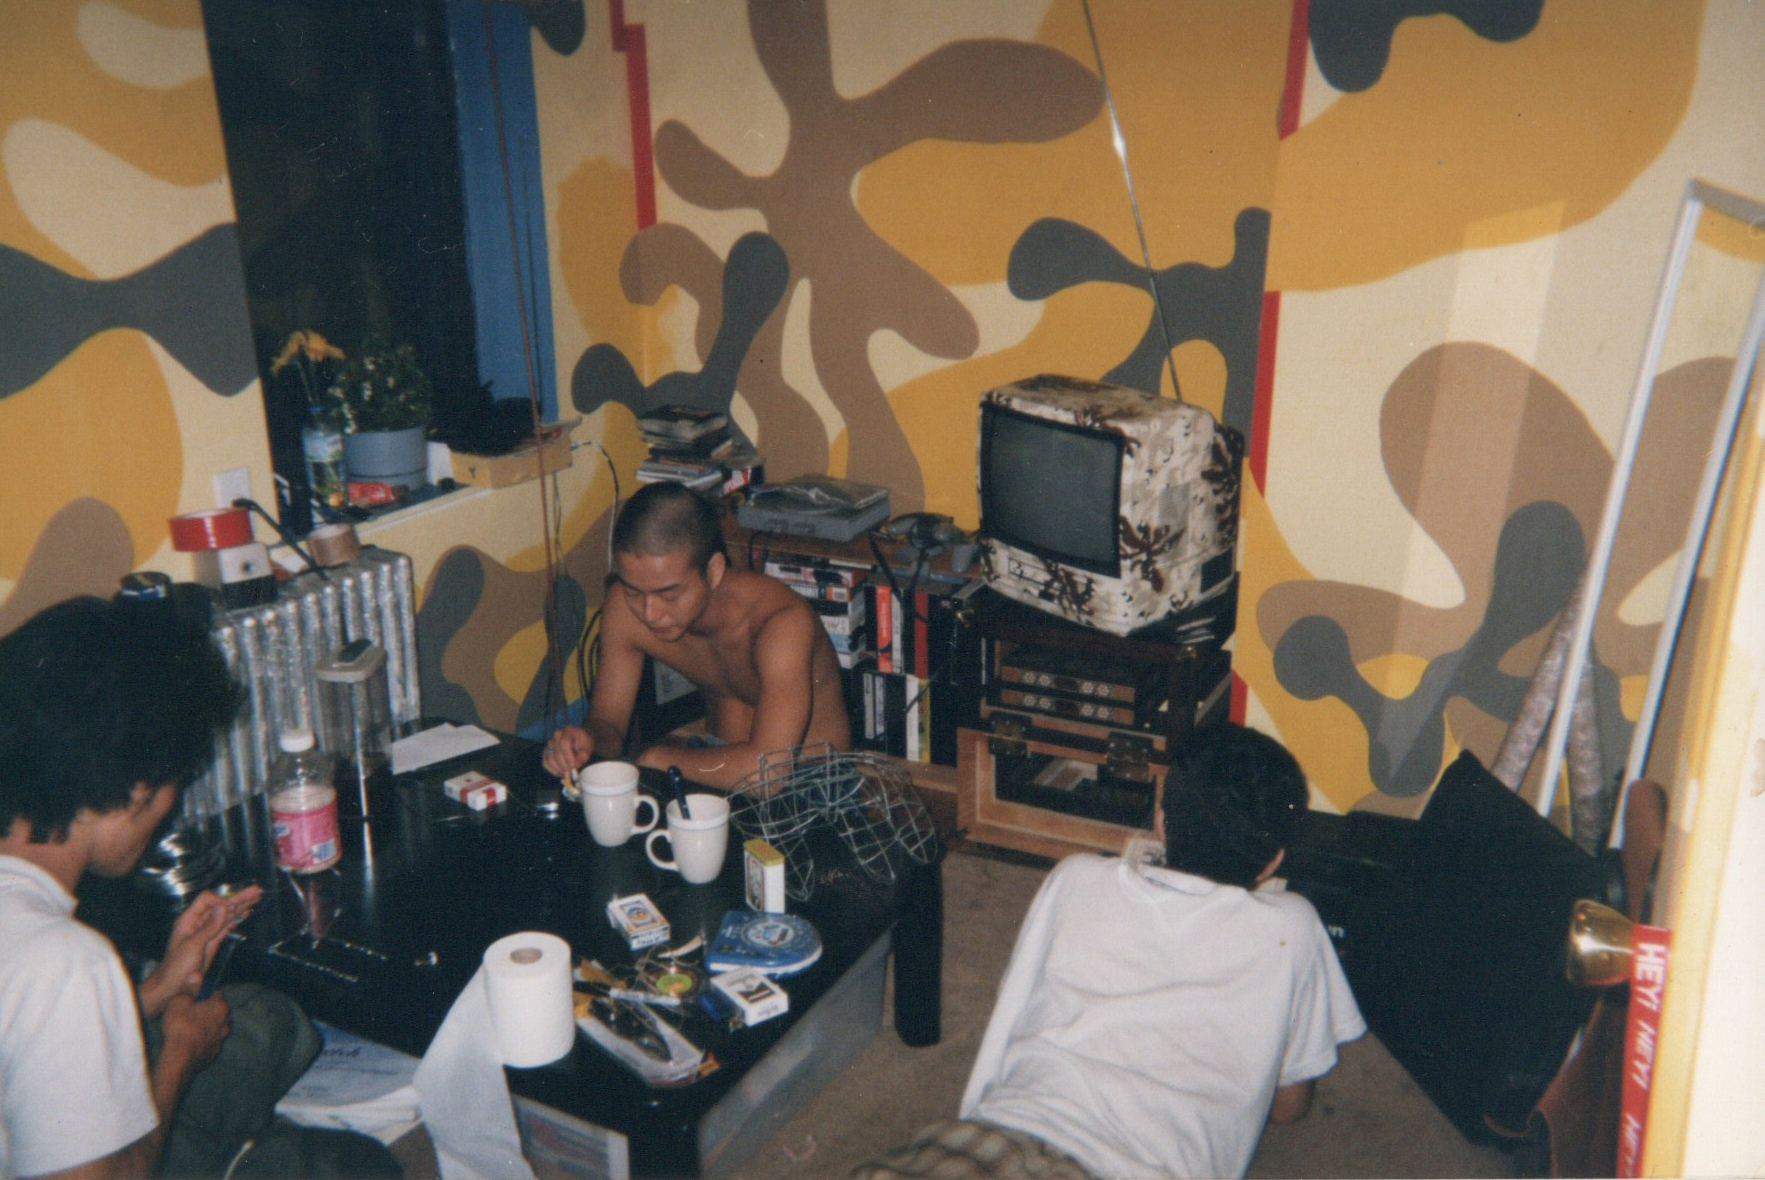 One room in Kurata’s East Village apartment back in 1999